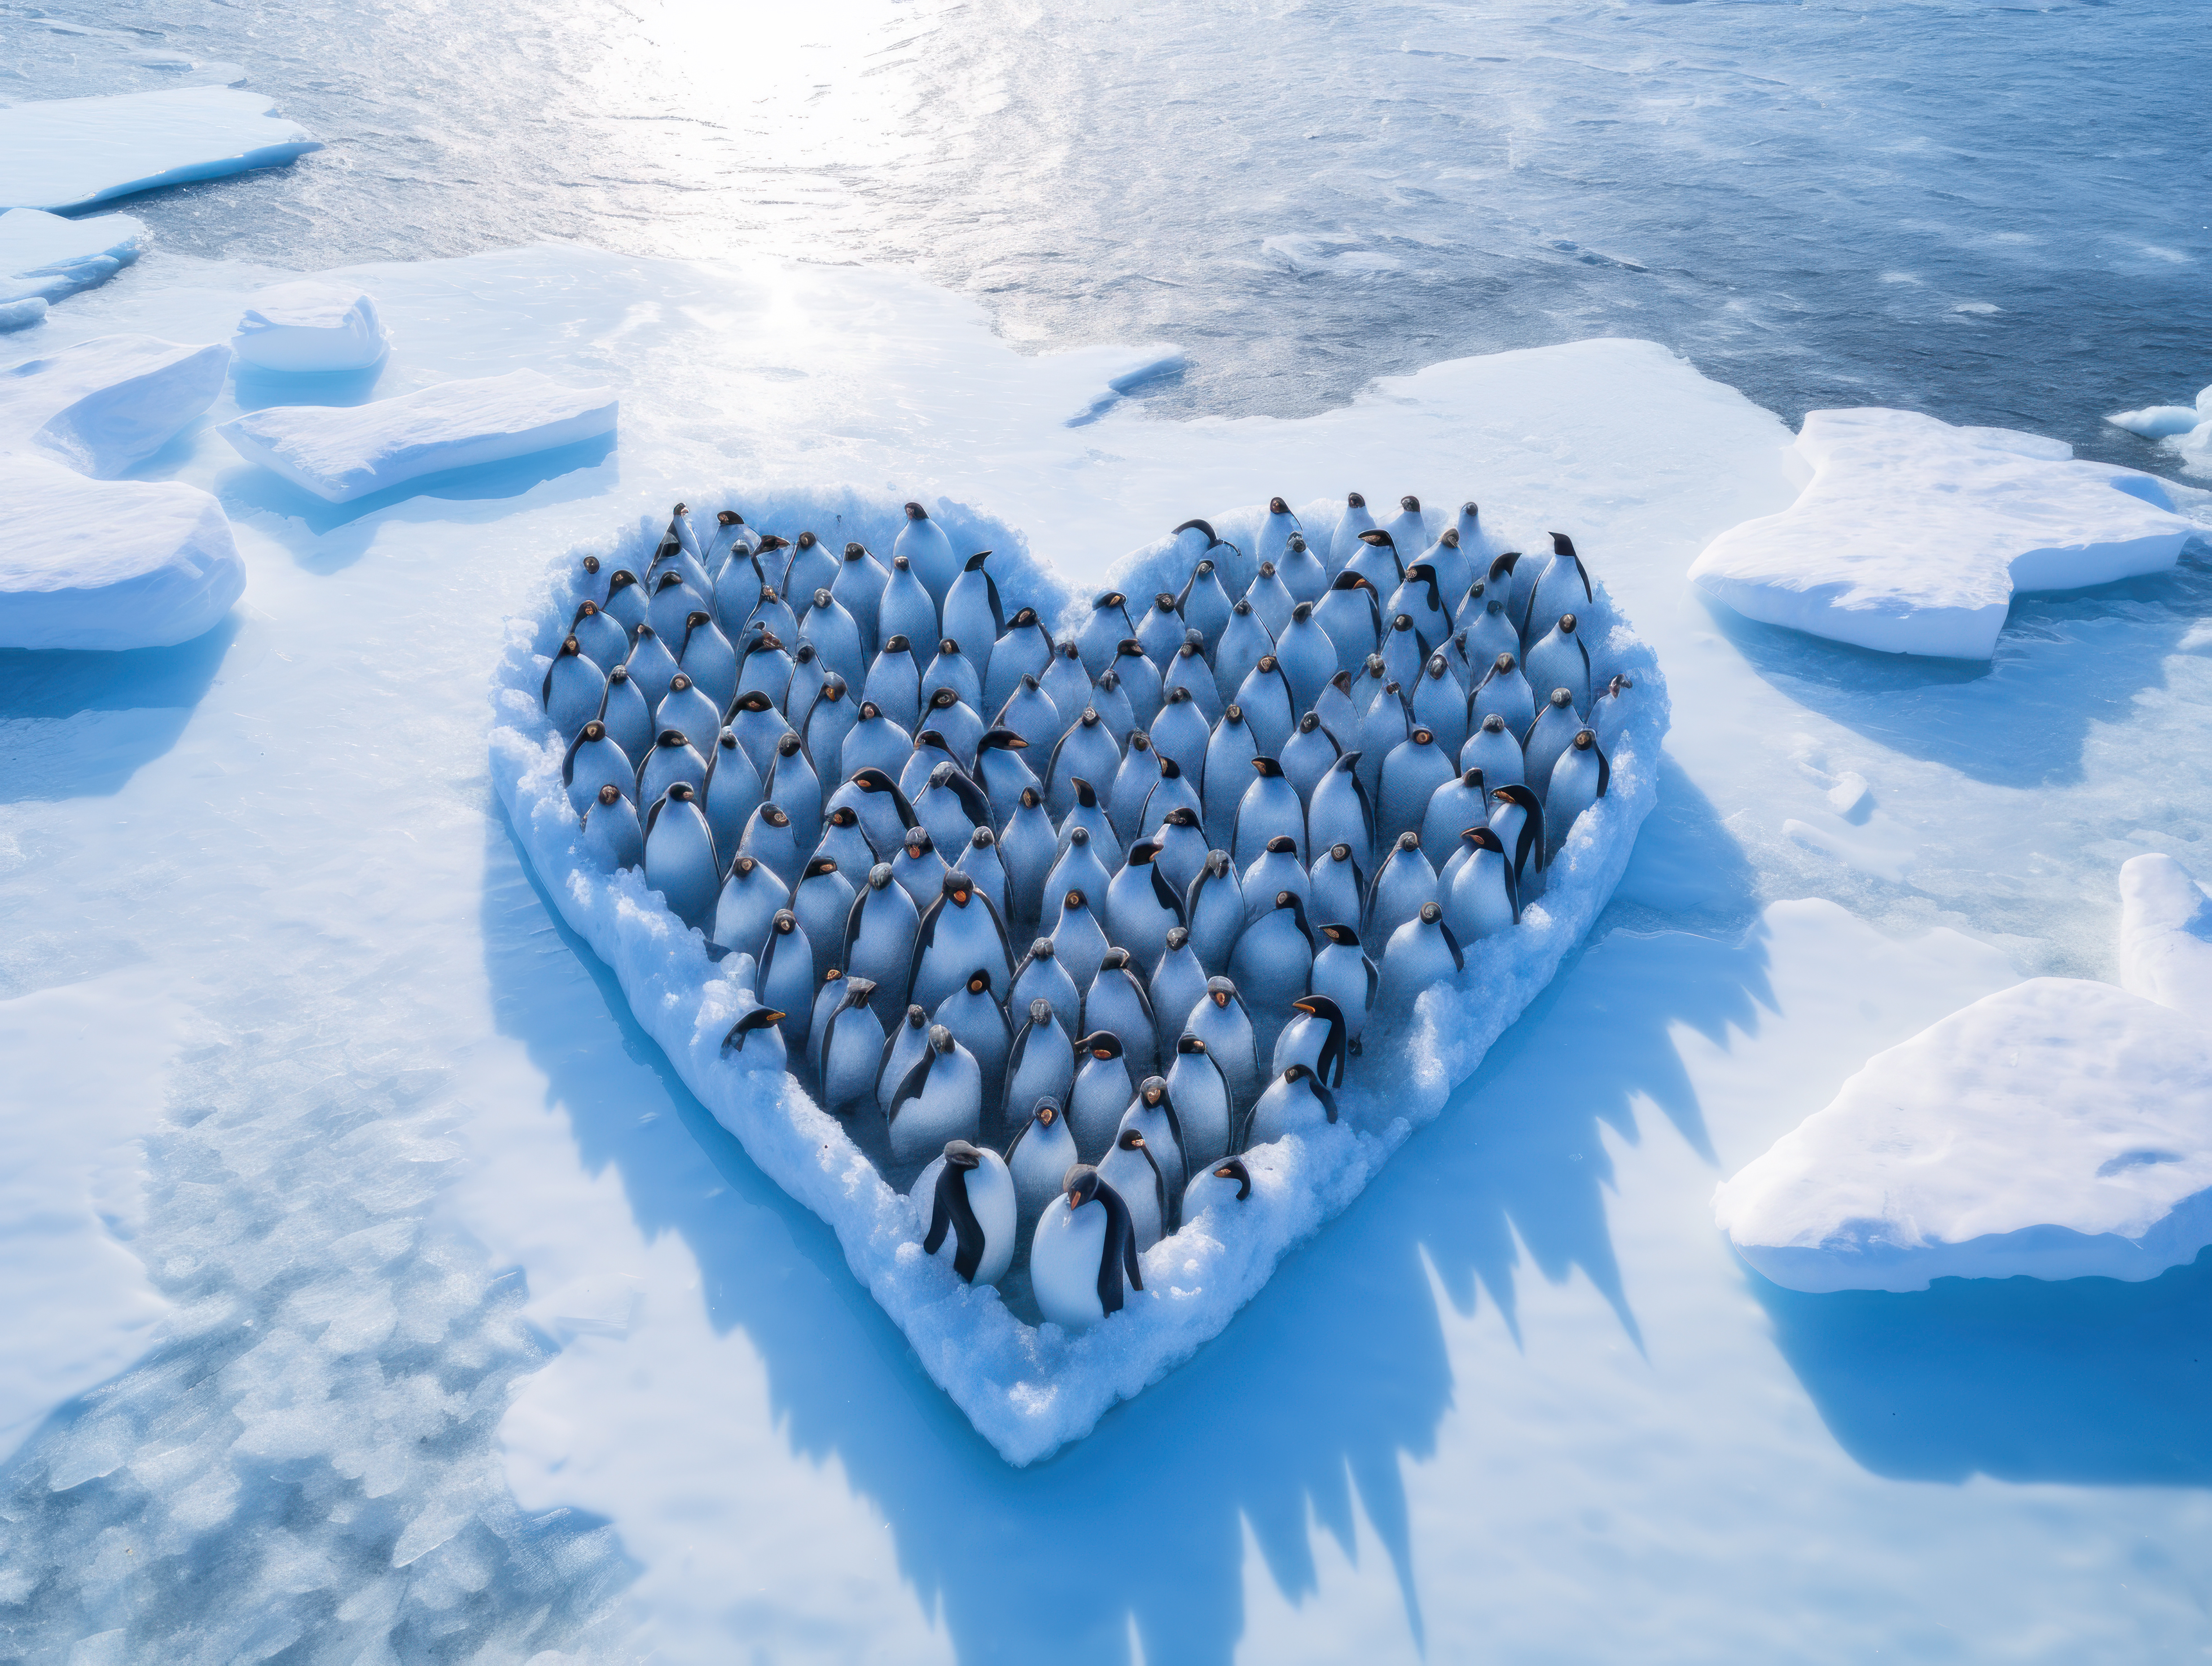 Penguins grouped together into the shape of a heart